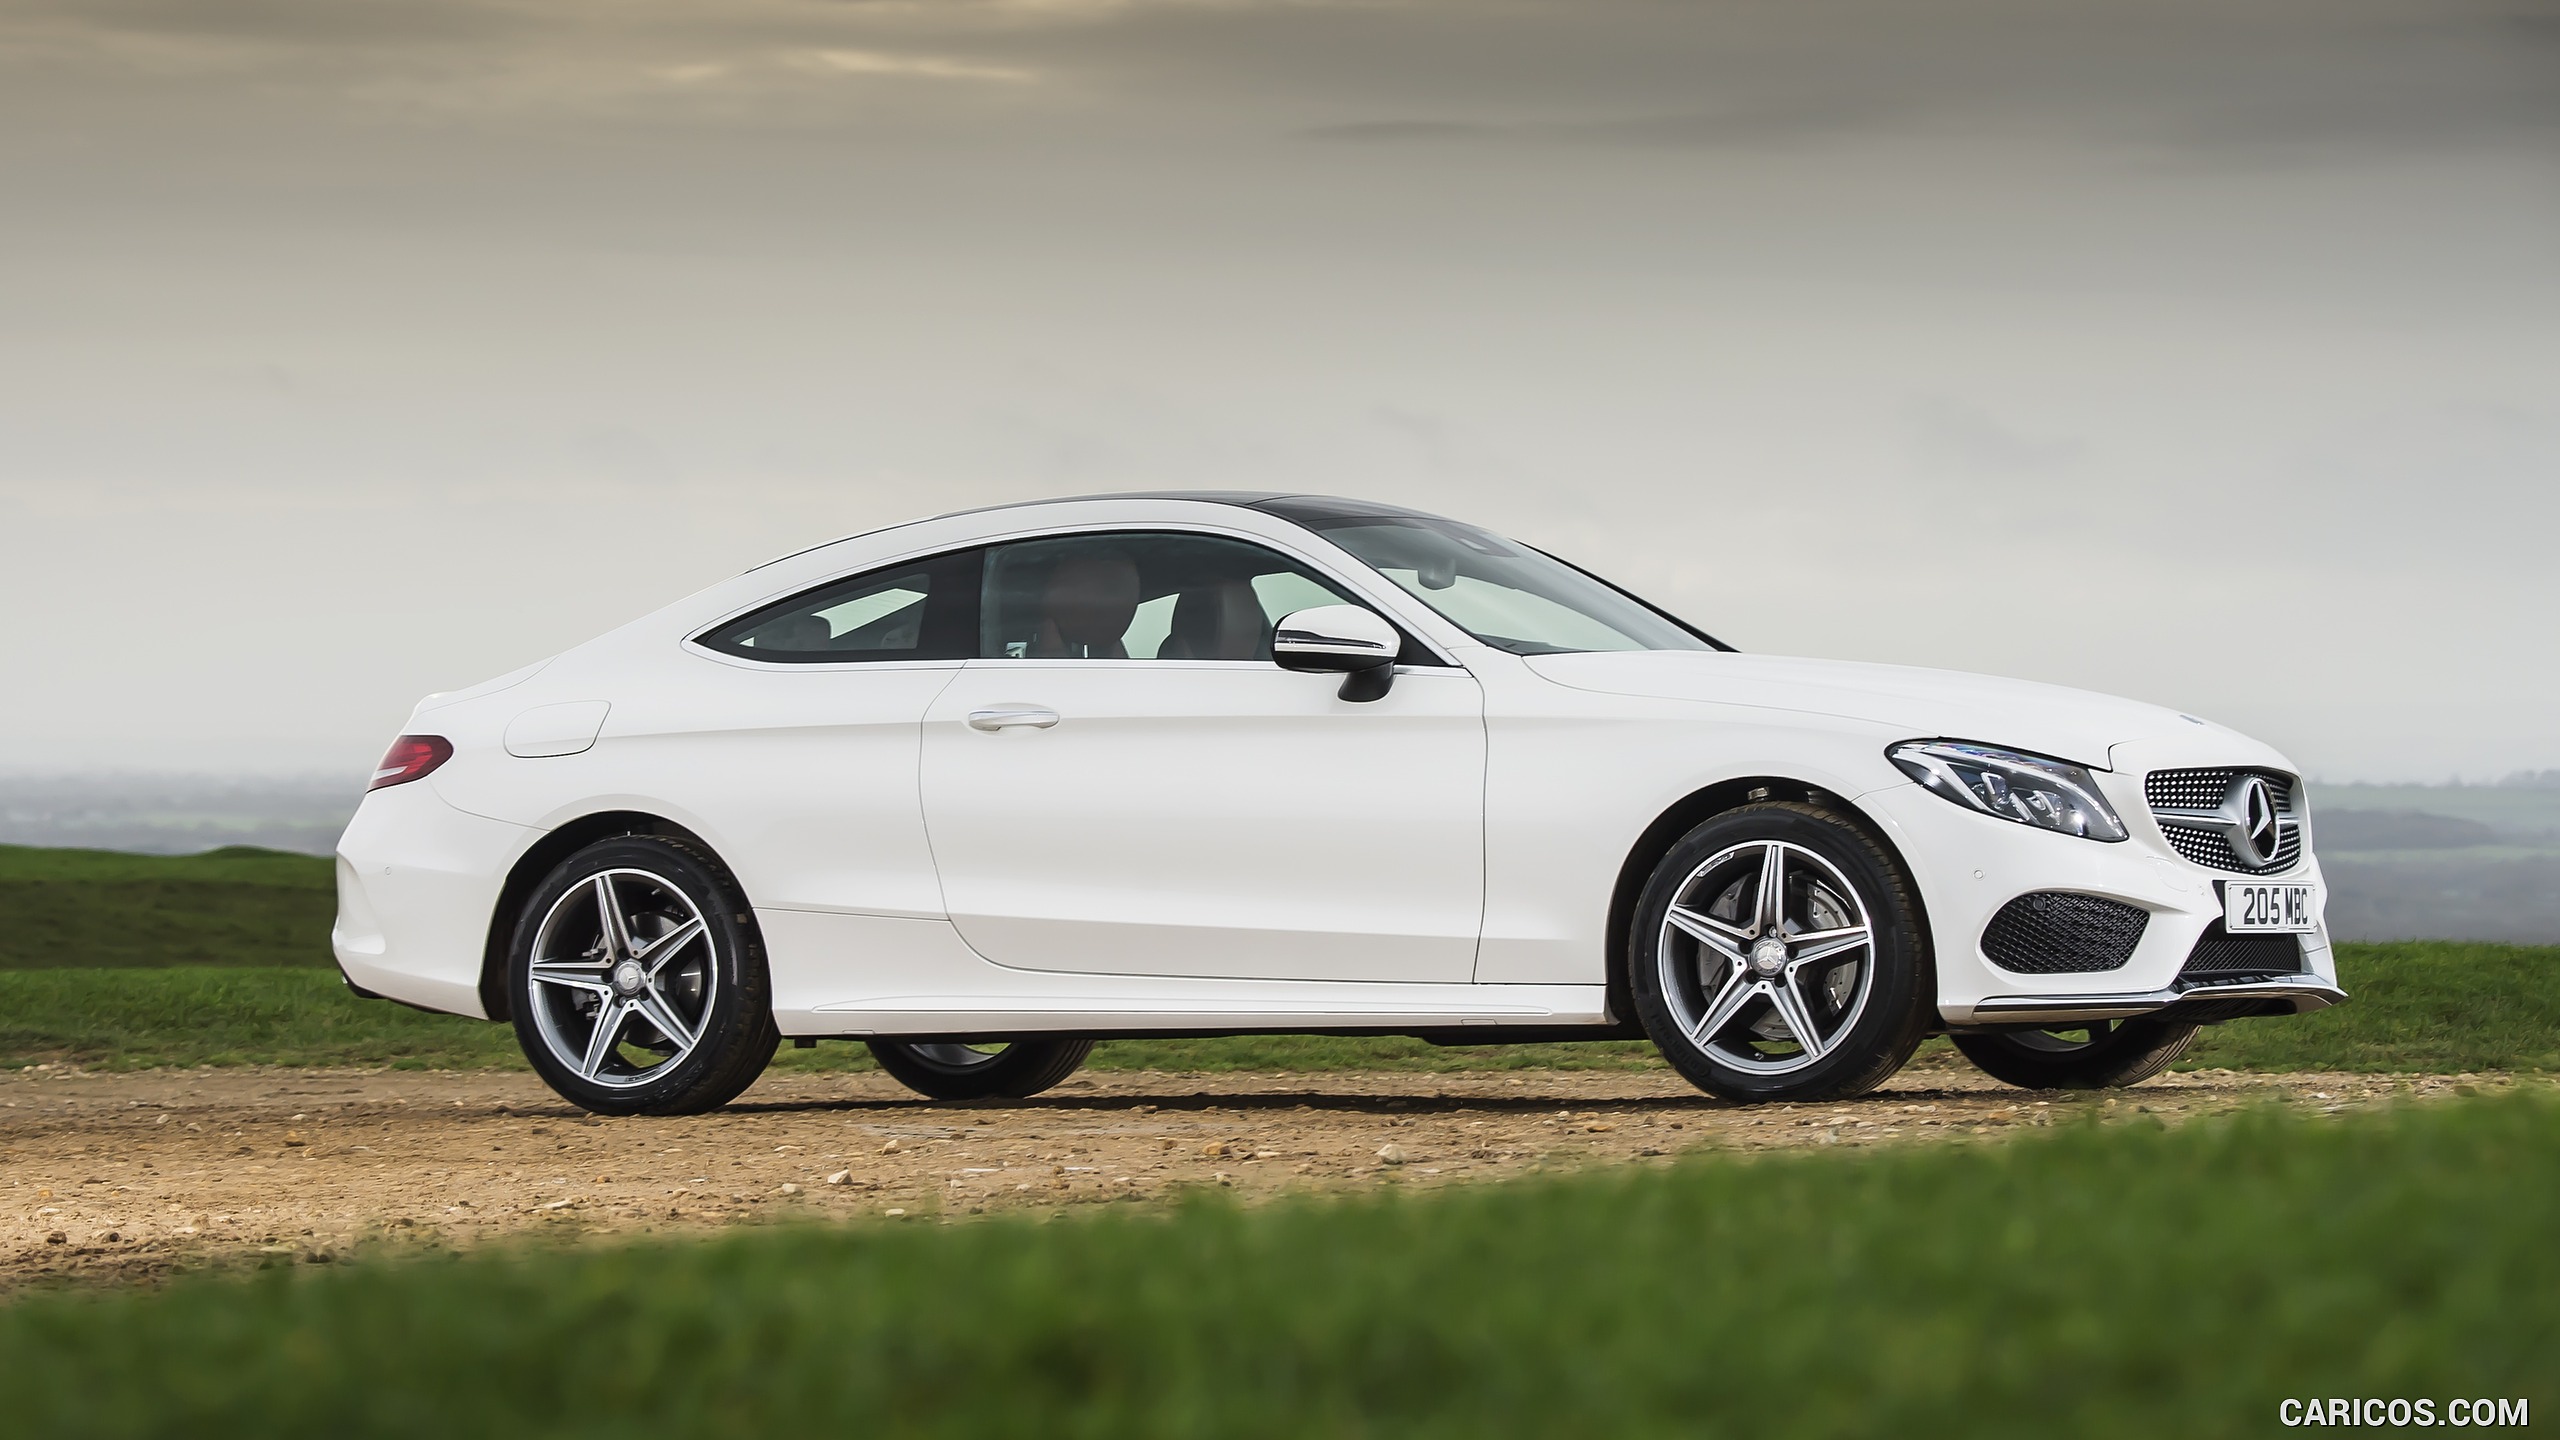 2017 Mercedes-Benz C-Class Coupe (UK-Spec) - Side, #114 of 210